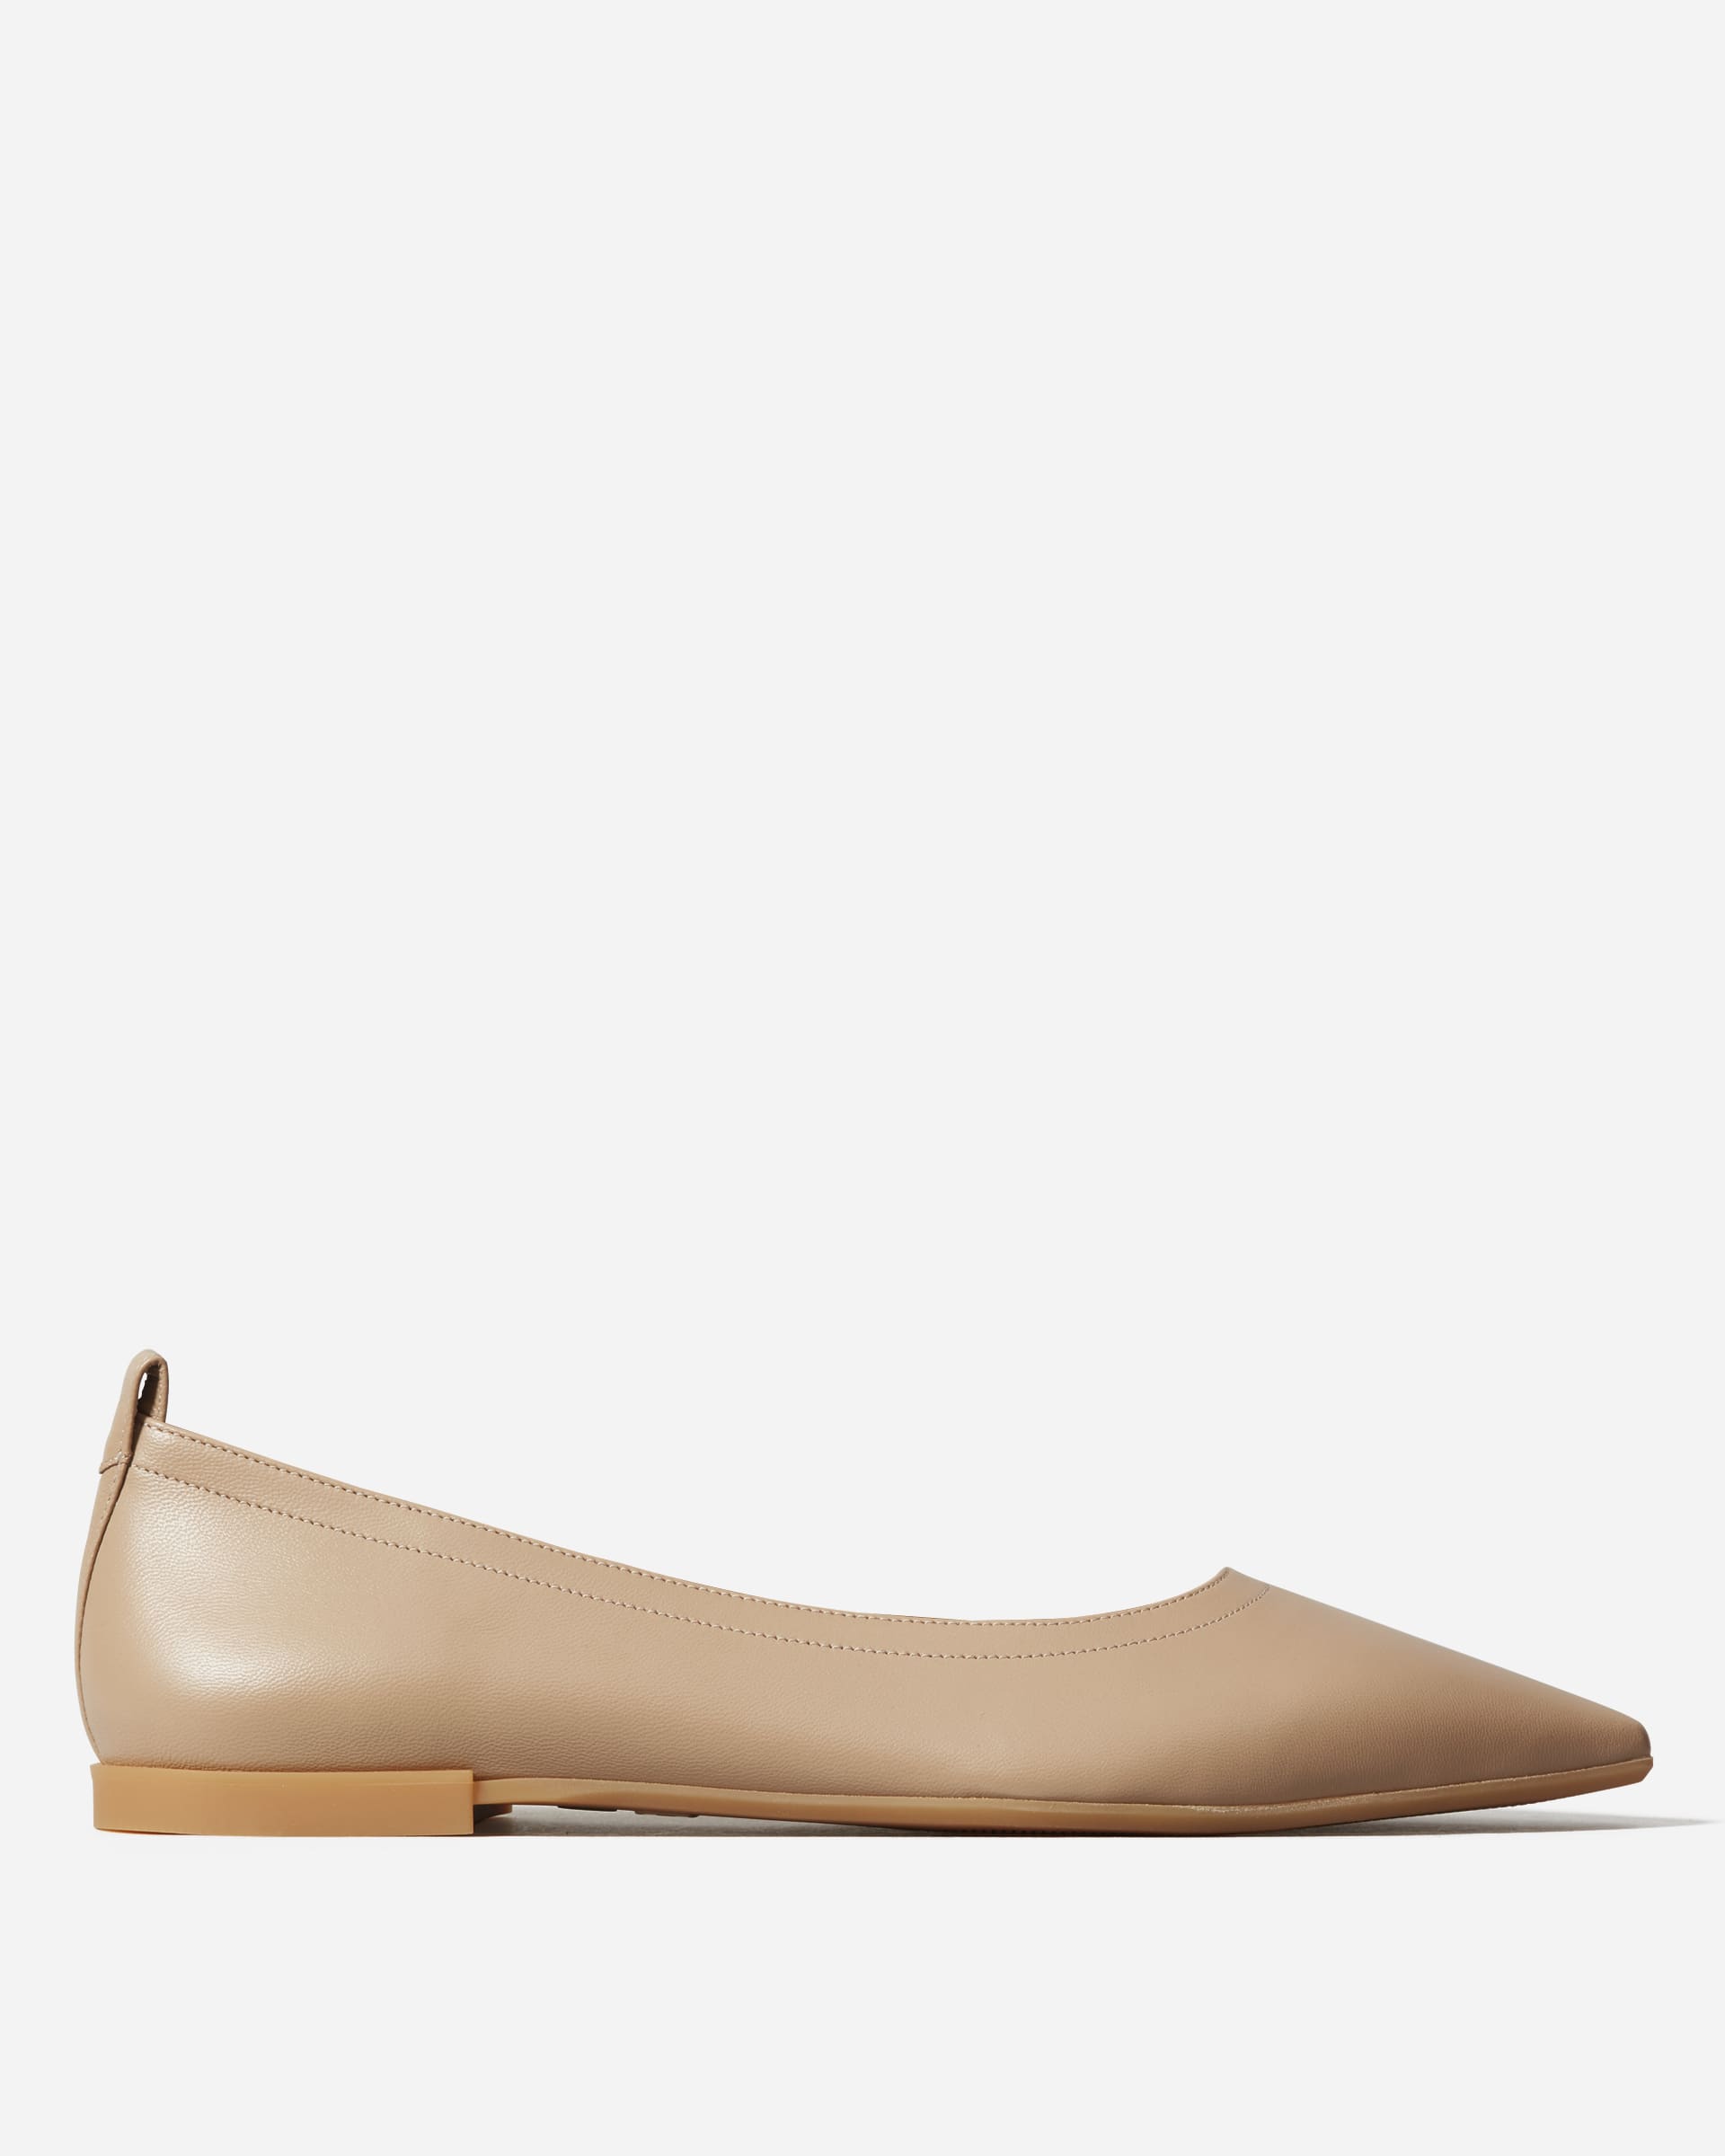 The 40-Hour Flat Taupe – Everlane